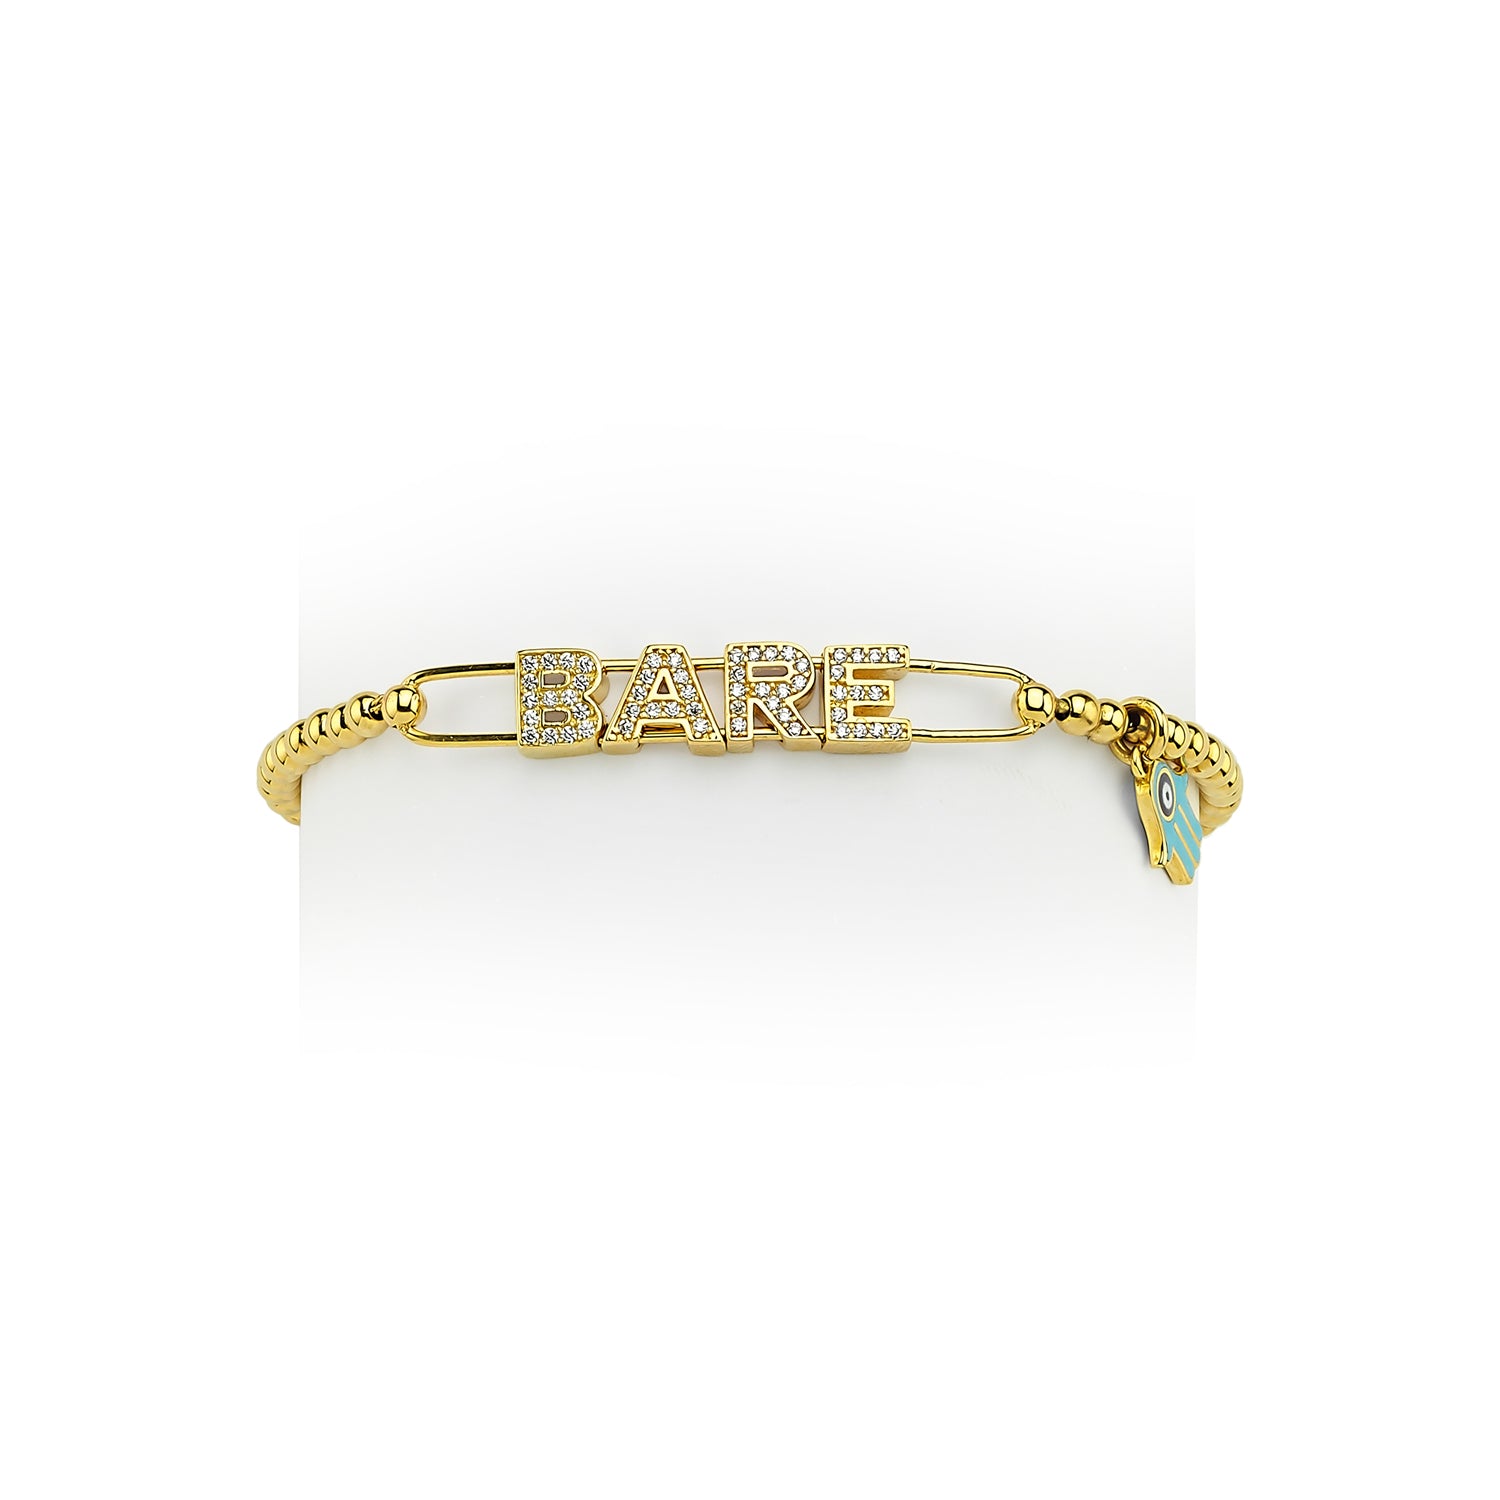 GOLD INITIAL BRACELET WITH A CHARM